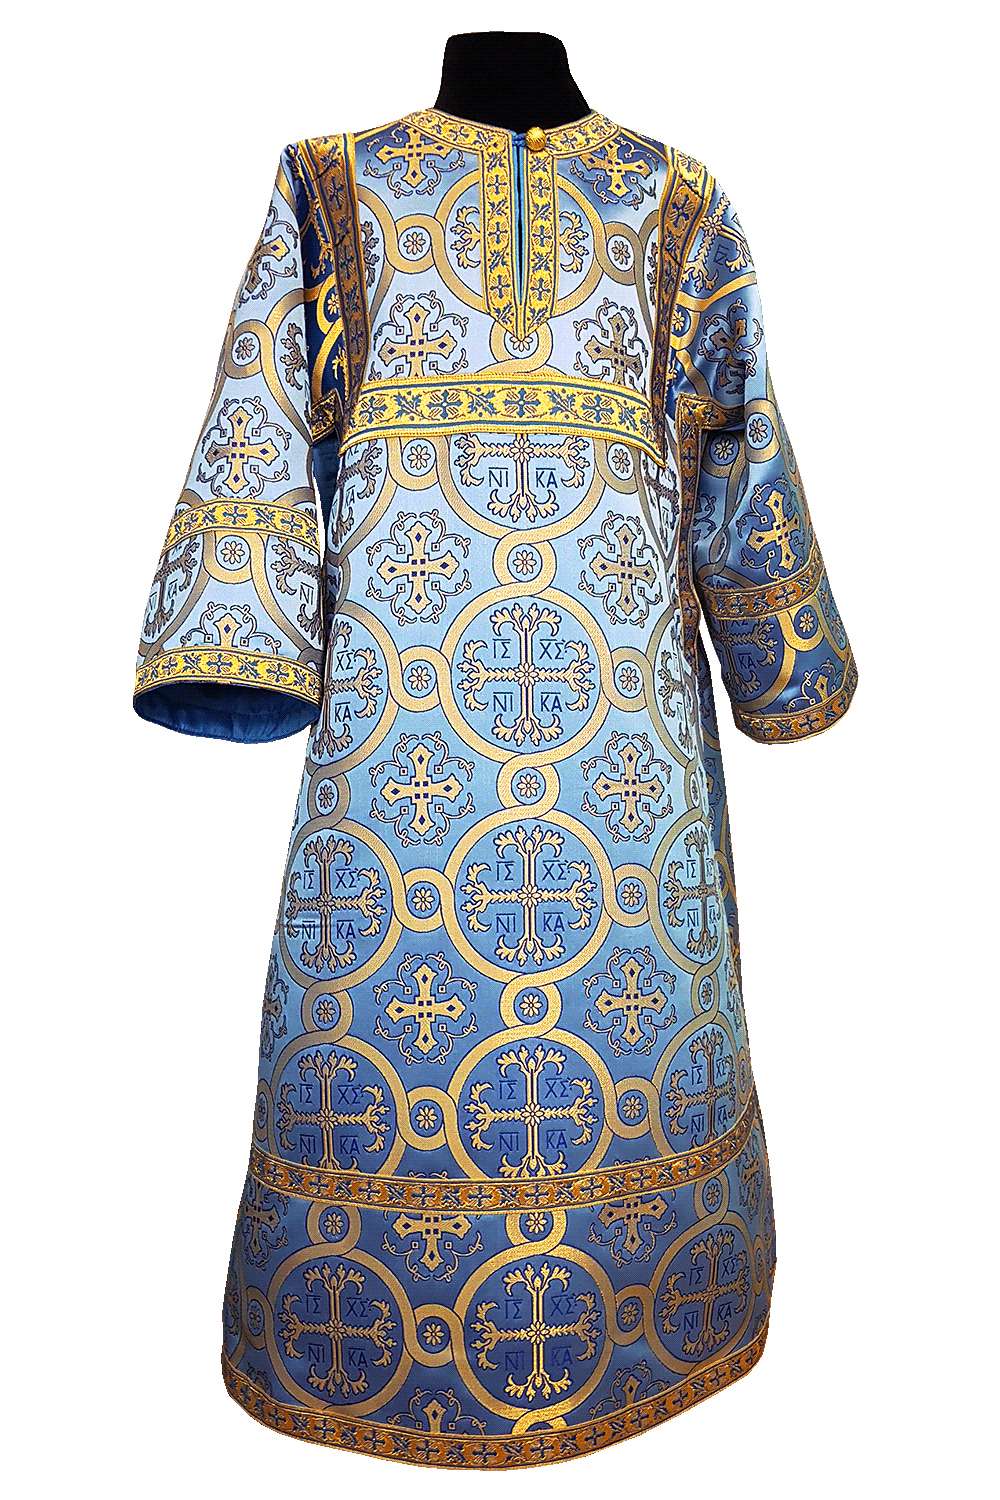 Altar Boy Sticharion blue with gold. For kids' height 134-146cm (52-58'')